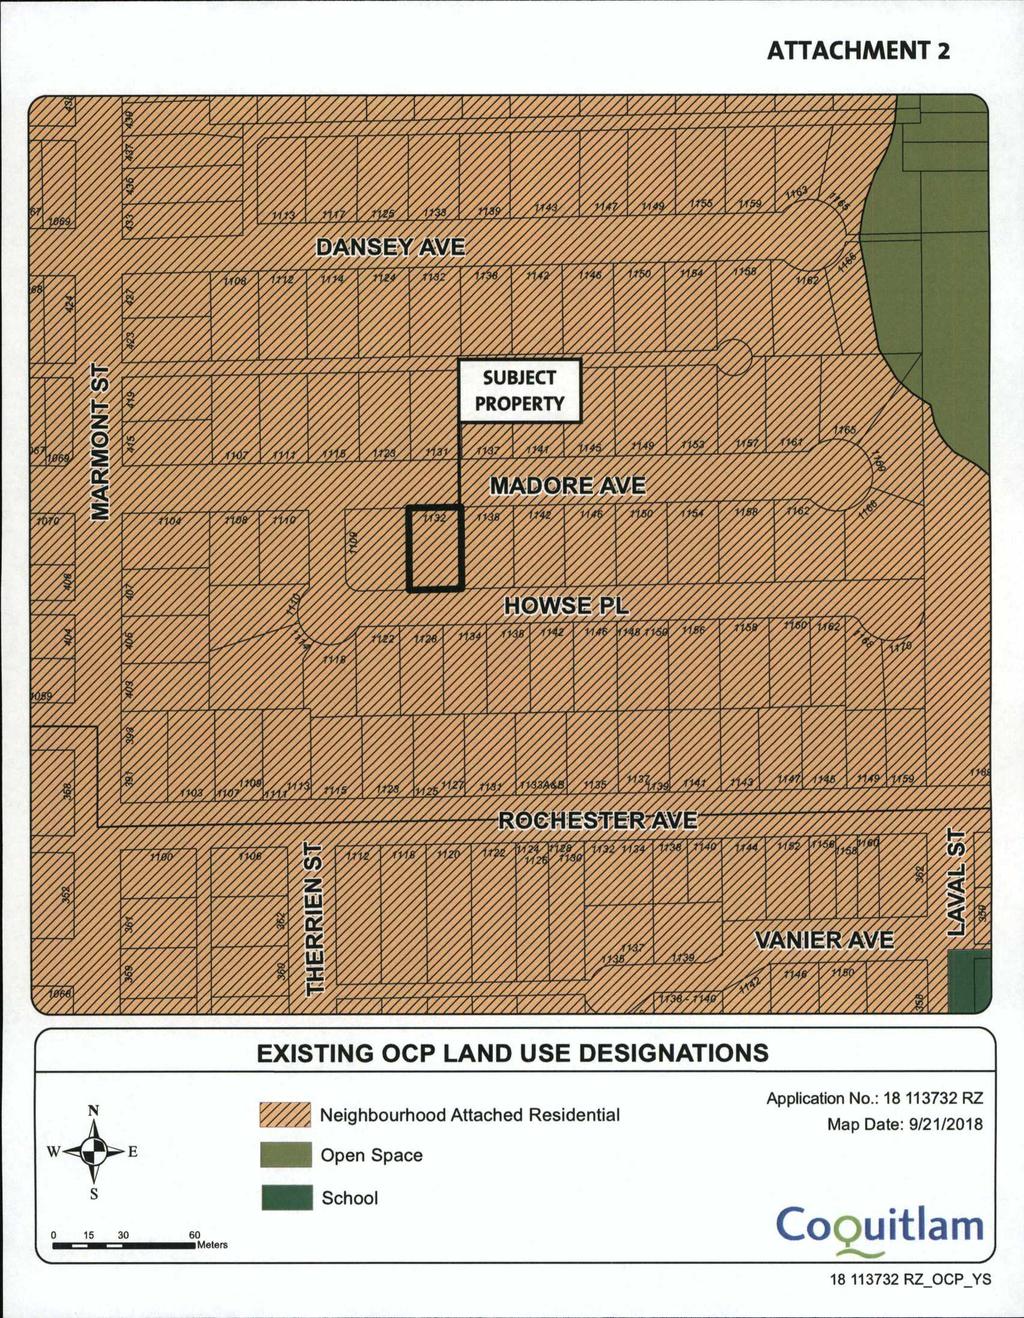 ATTACHMENT 2 EXISTING OCP LAND USE DESIGNATIONS N s 0 15 30 60 Meters Neighbourhood Attached